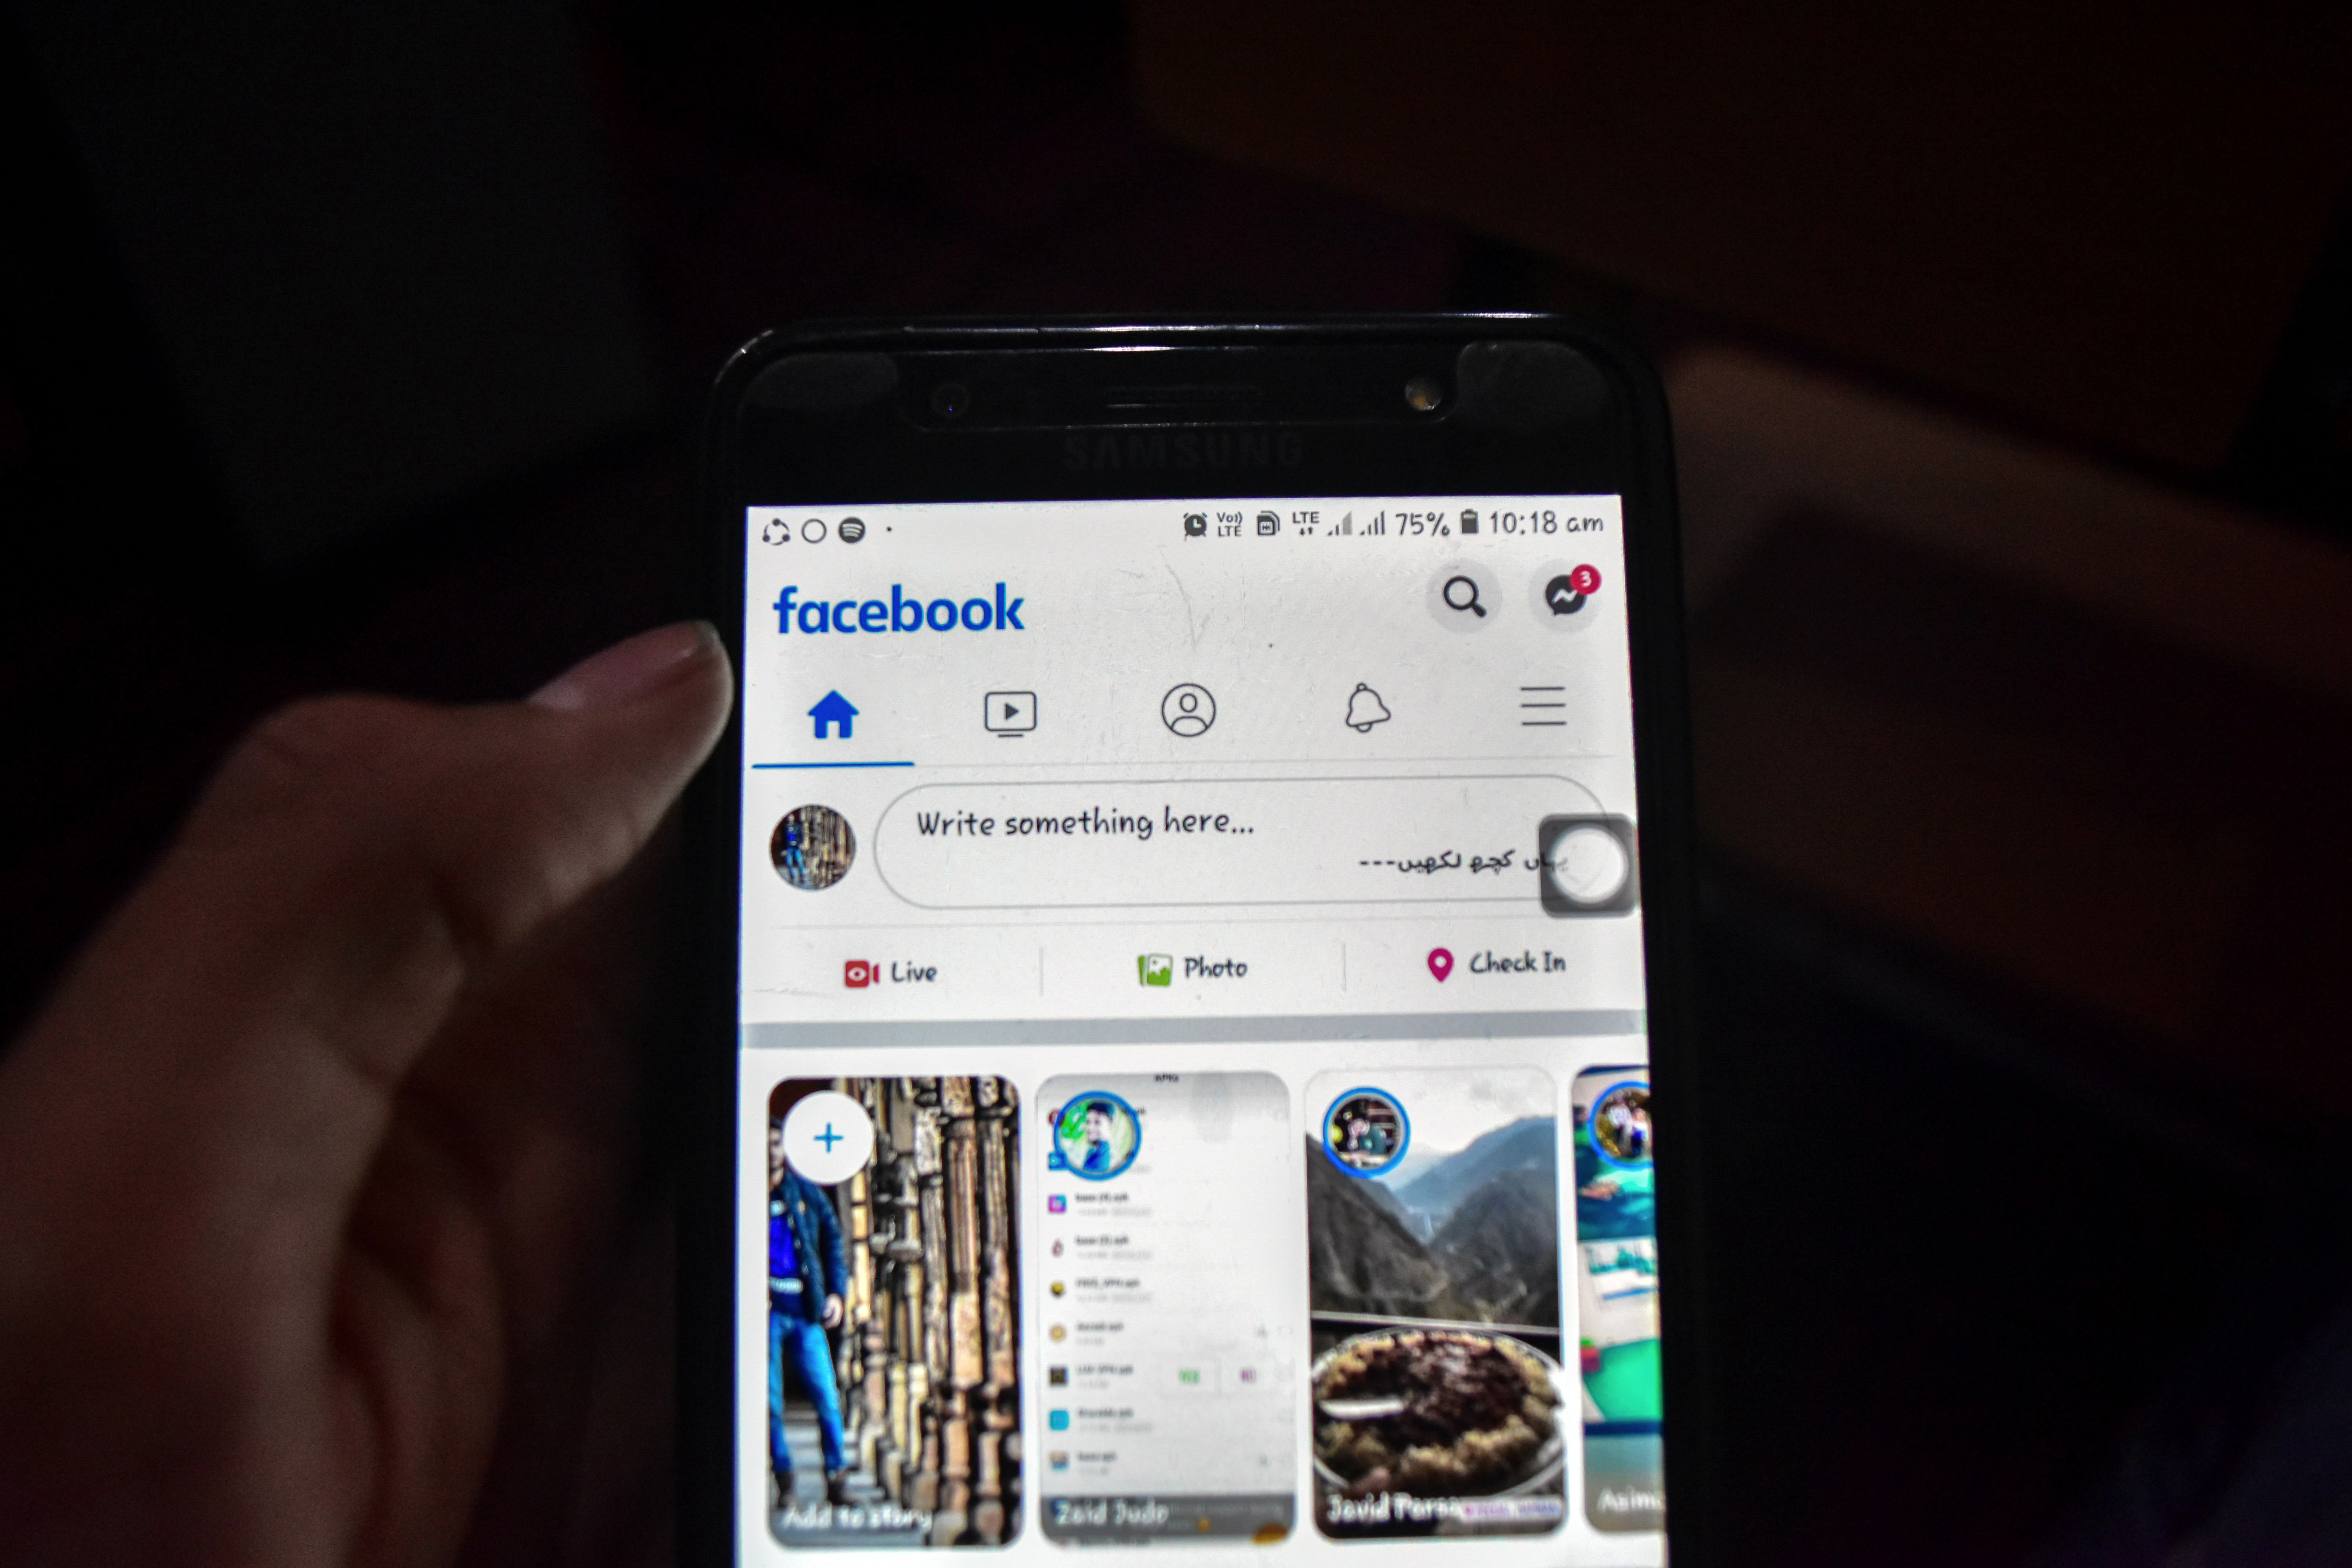 Facebook page displayed on a phone.